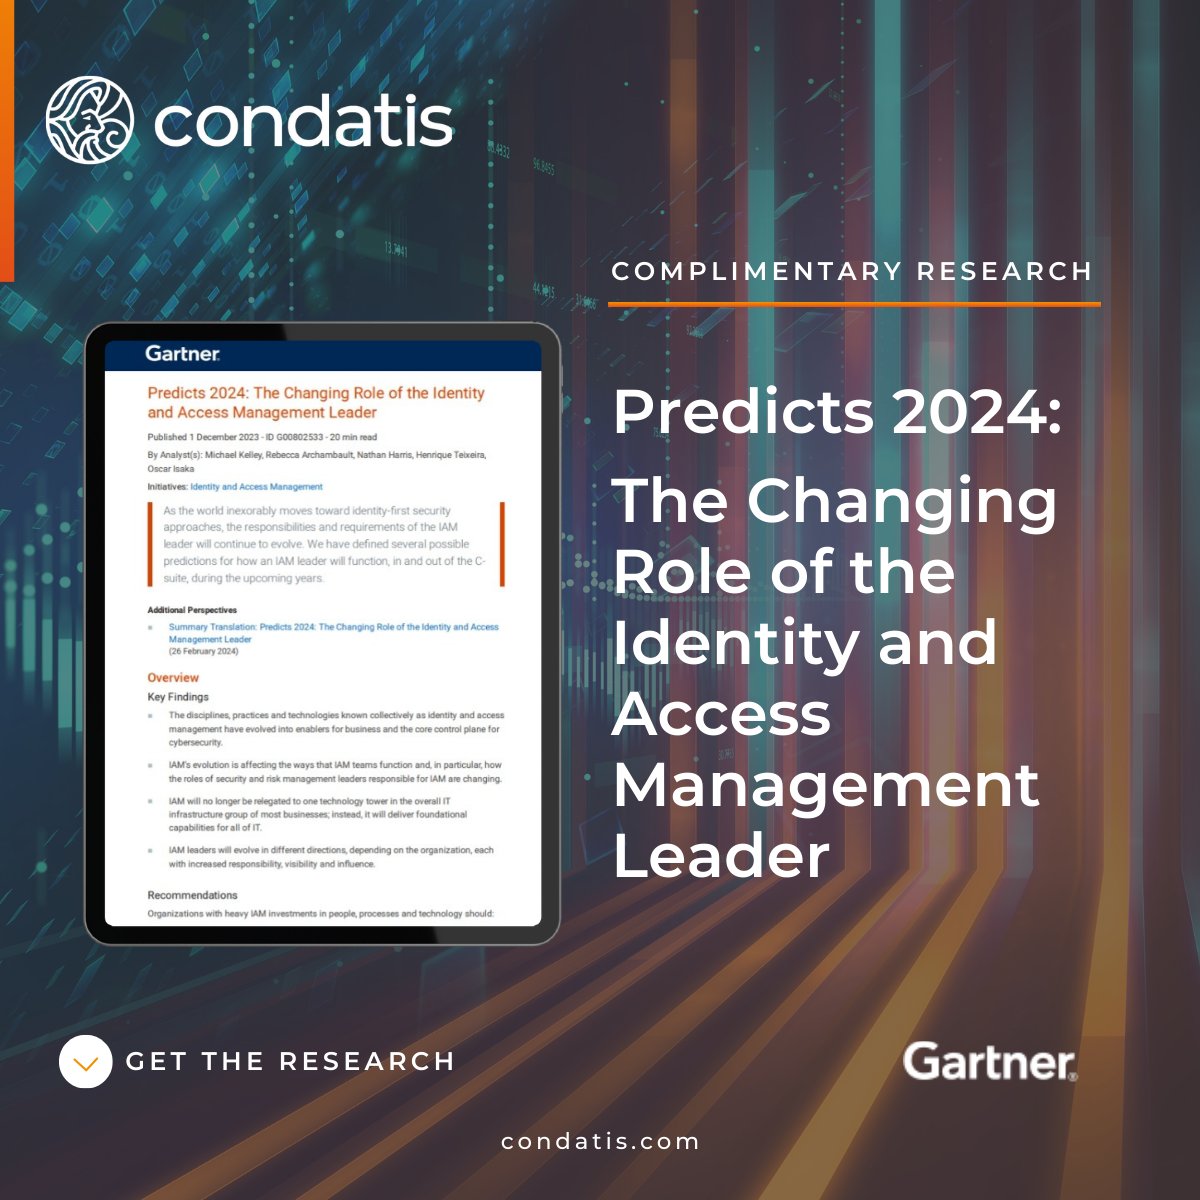 Discover the Future of Identity and Access Management (IAM) Leadership in 2024!

Explore @Gartner_inc's trusted research on ‘The Changing Role of the Identity and Access Management Leader’ ⬇

🔗 condatis.com/gartner-predic…

#IAM #Cybersecurity #FutureLeadership #Gartner